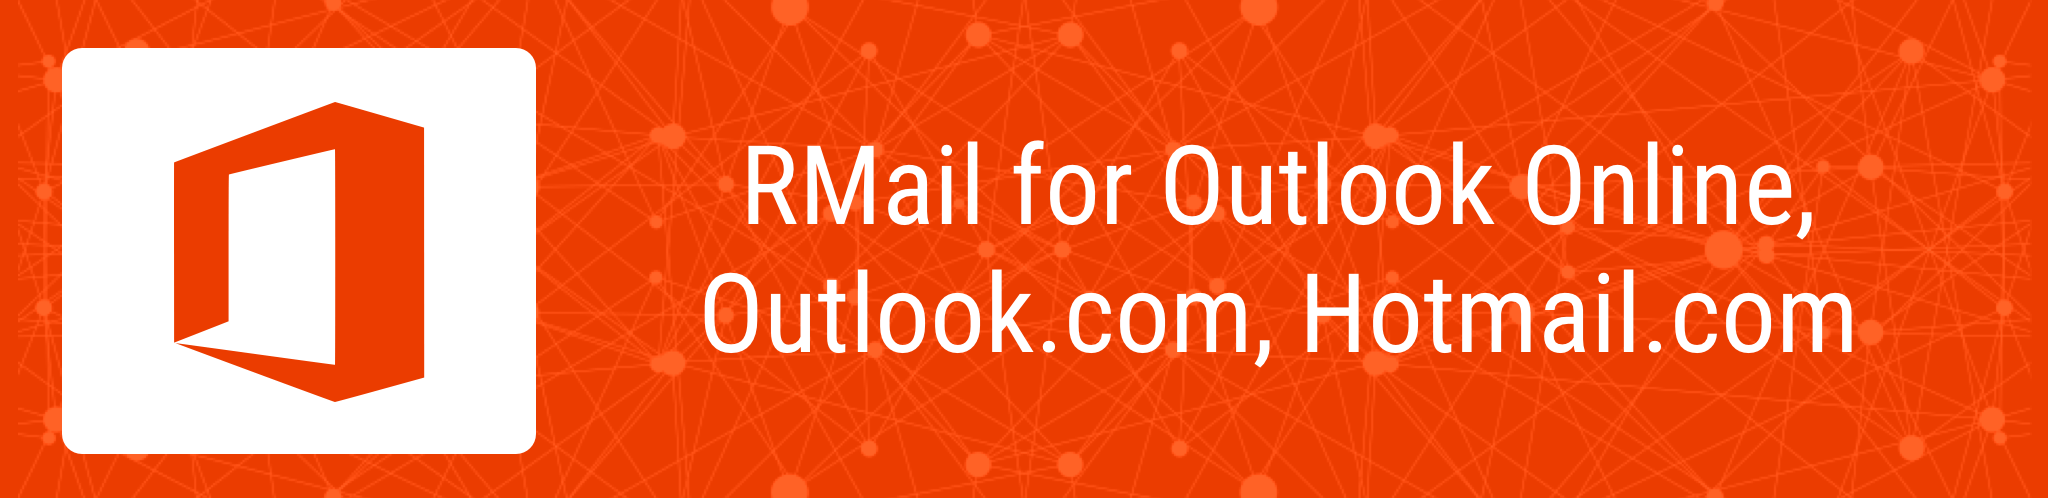 RMail for Outlook Online, Office 365 Online, Outlook.com, and Hotmail.com